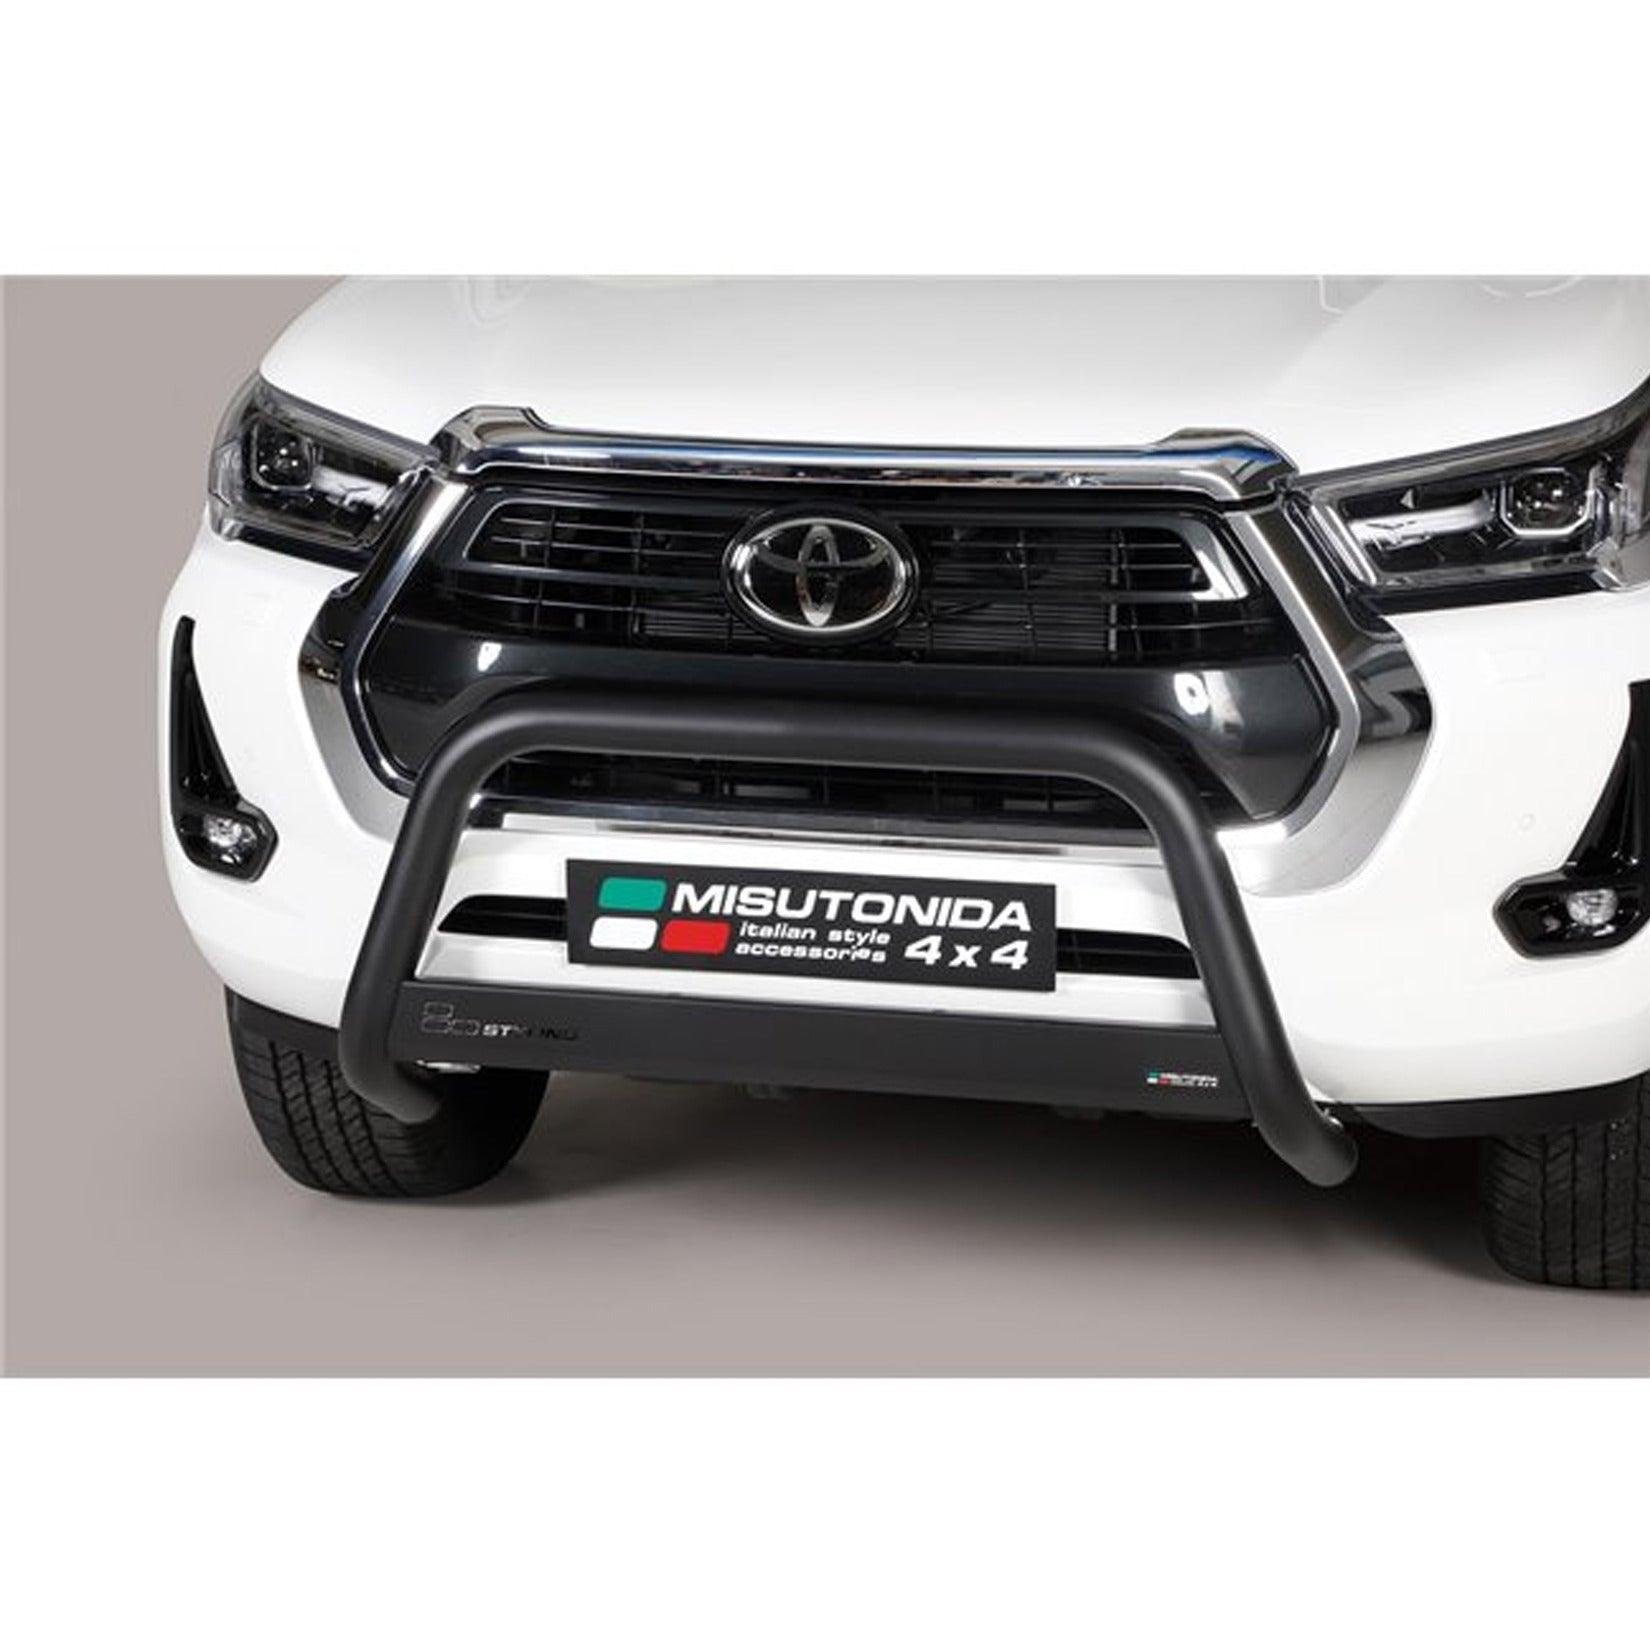 TOYOTA HILUX 2021 ON MISUTONIDA EC APPROVED FRONT BAR IN BLACK - 63MM - Storm Xccessories2